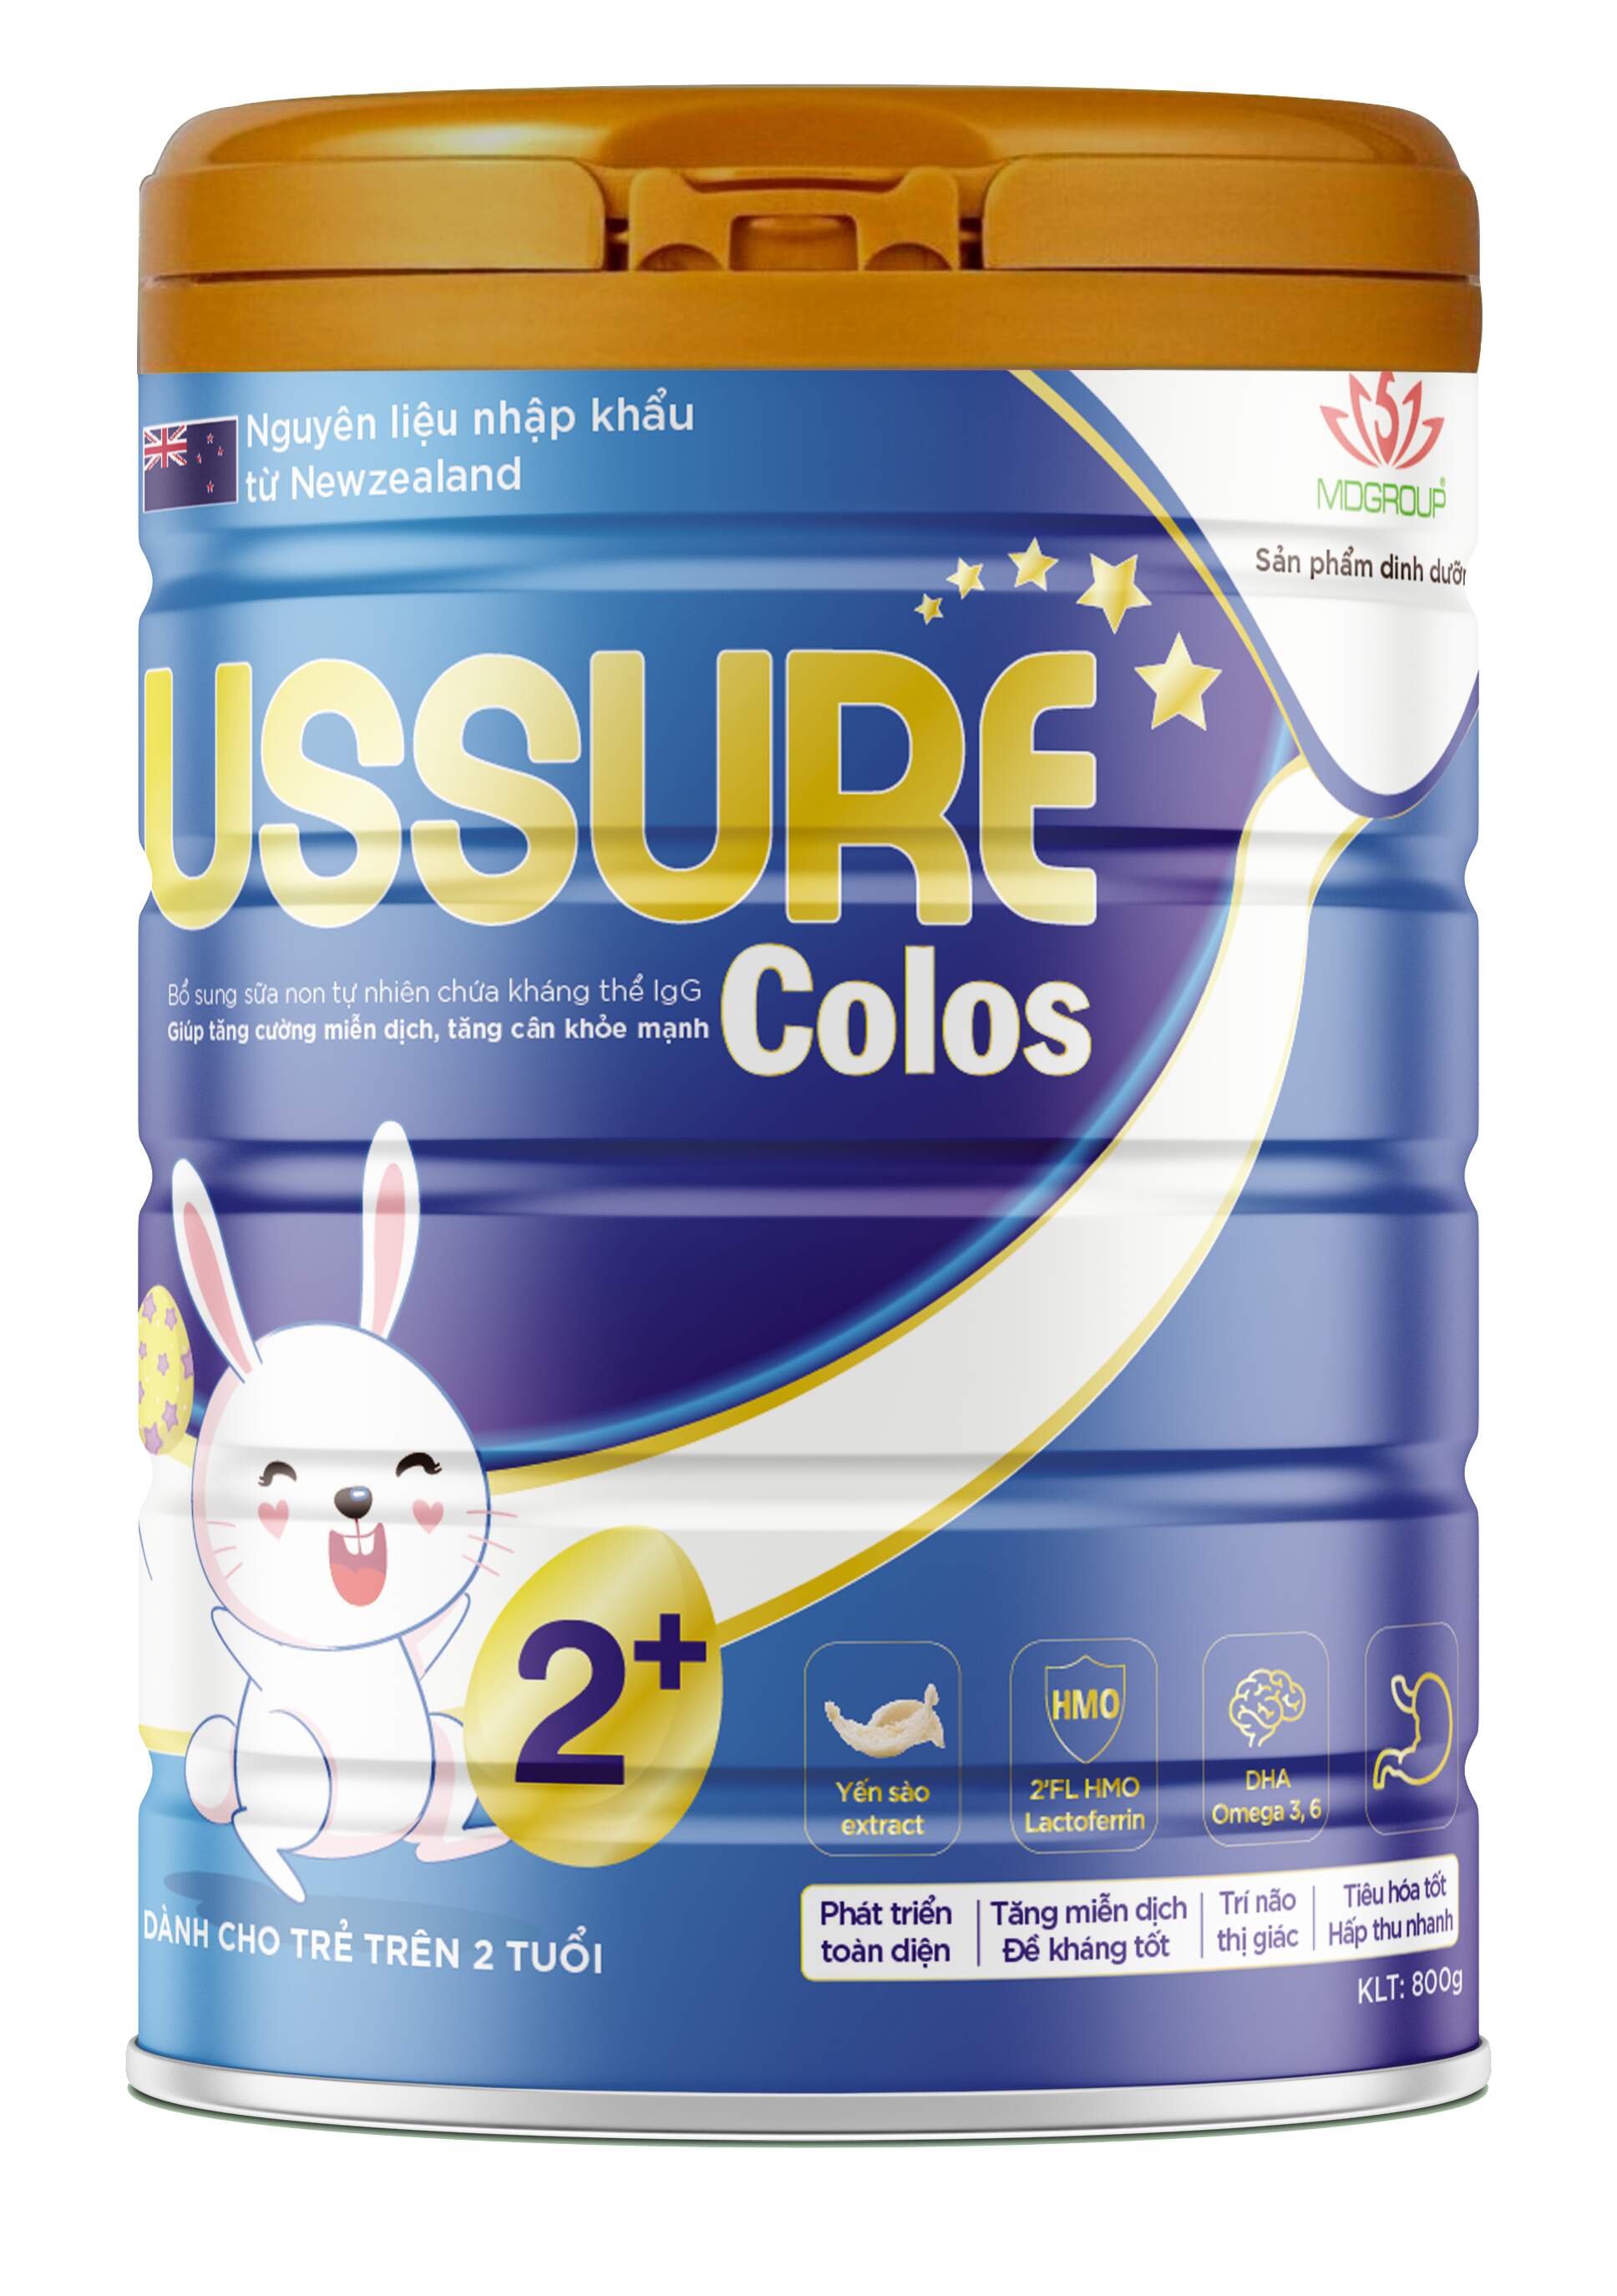 Ussure Colos 2+